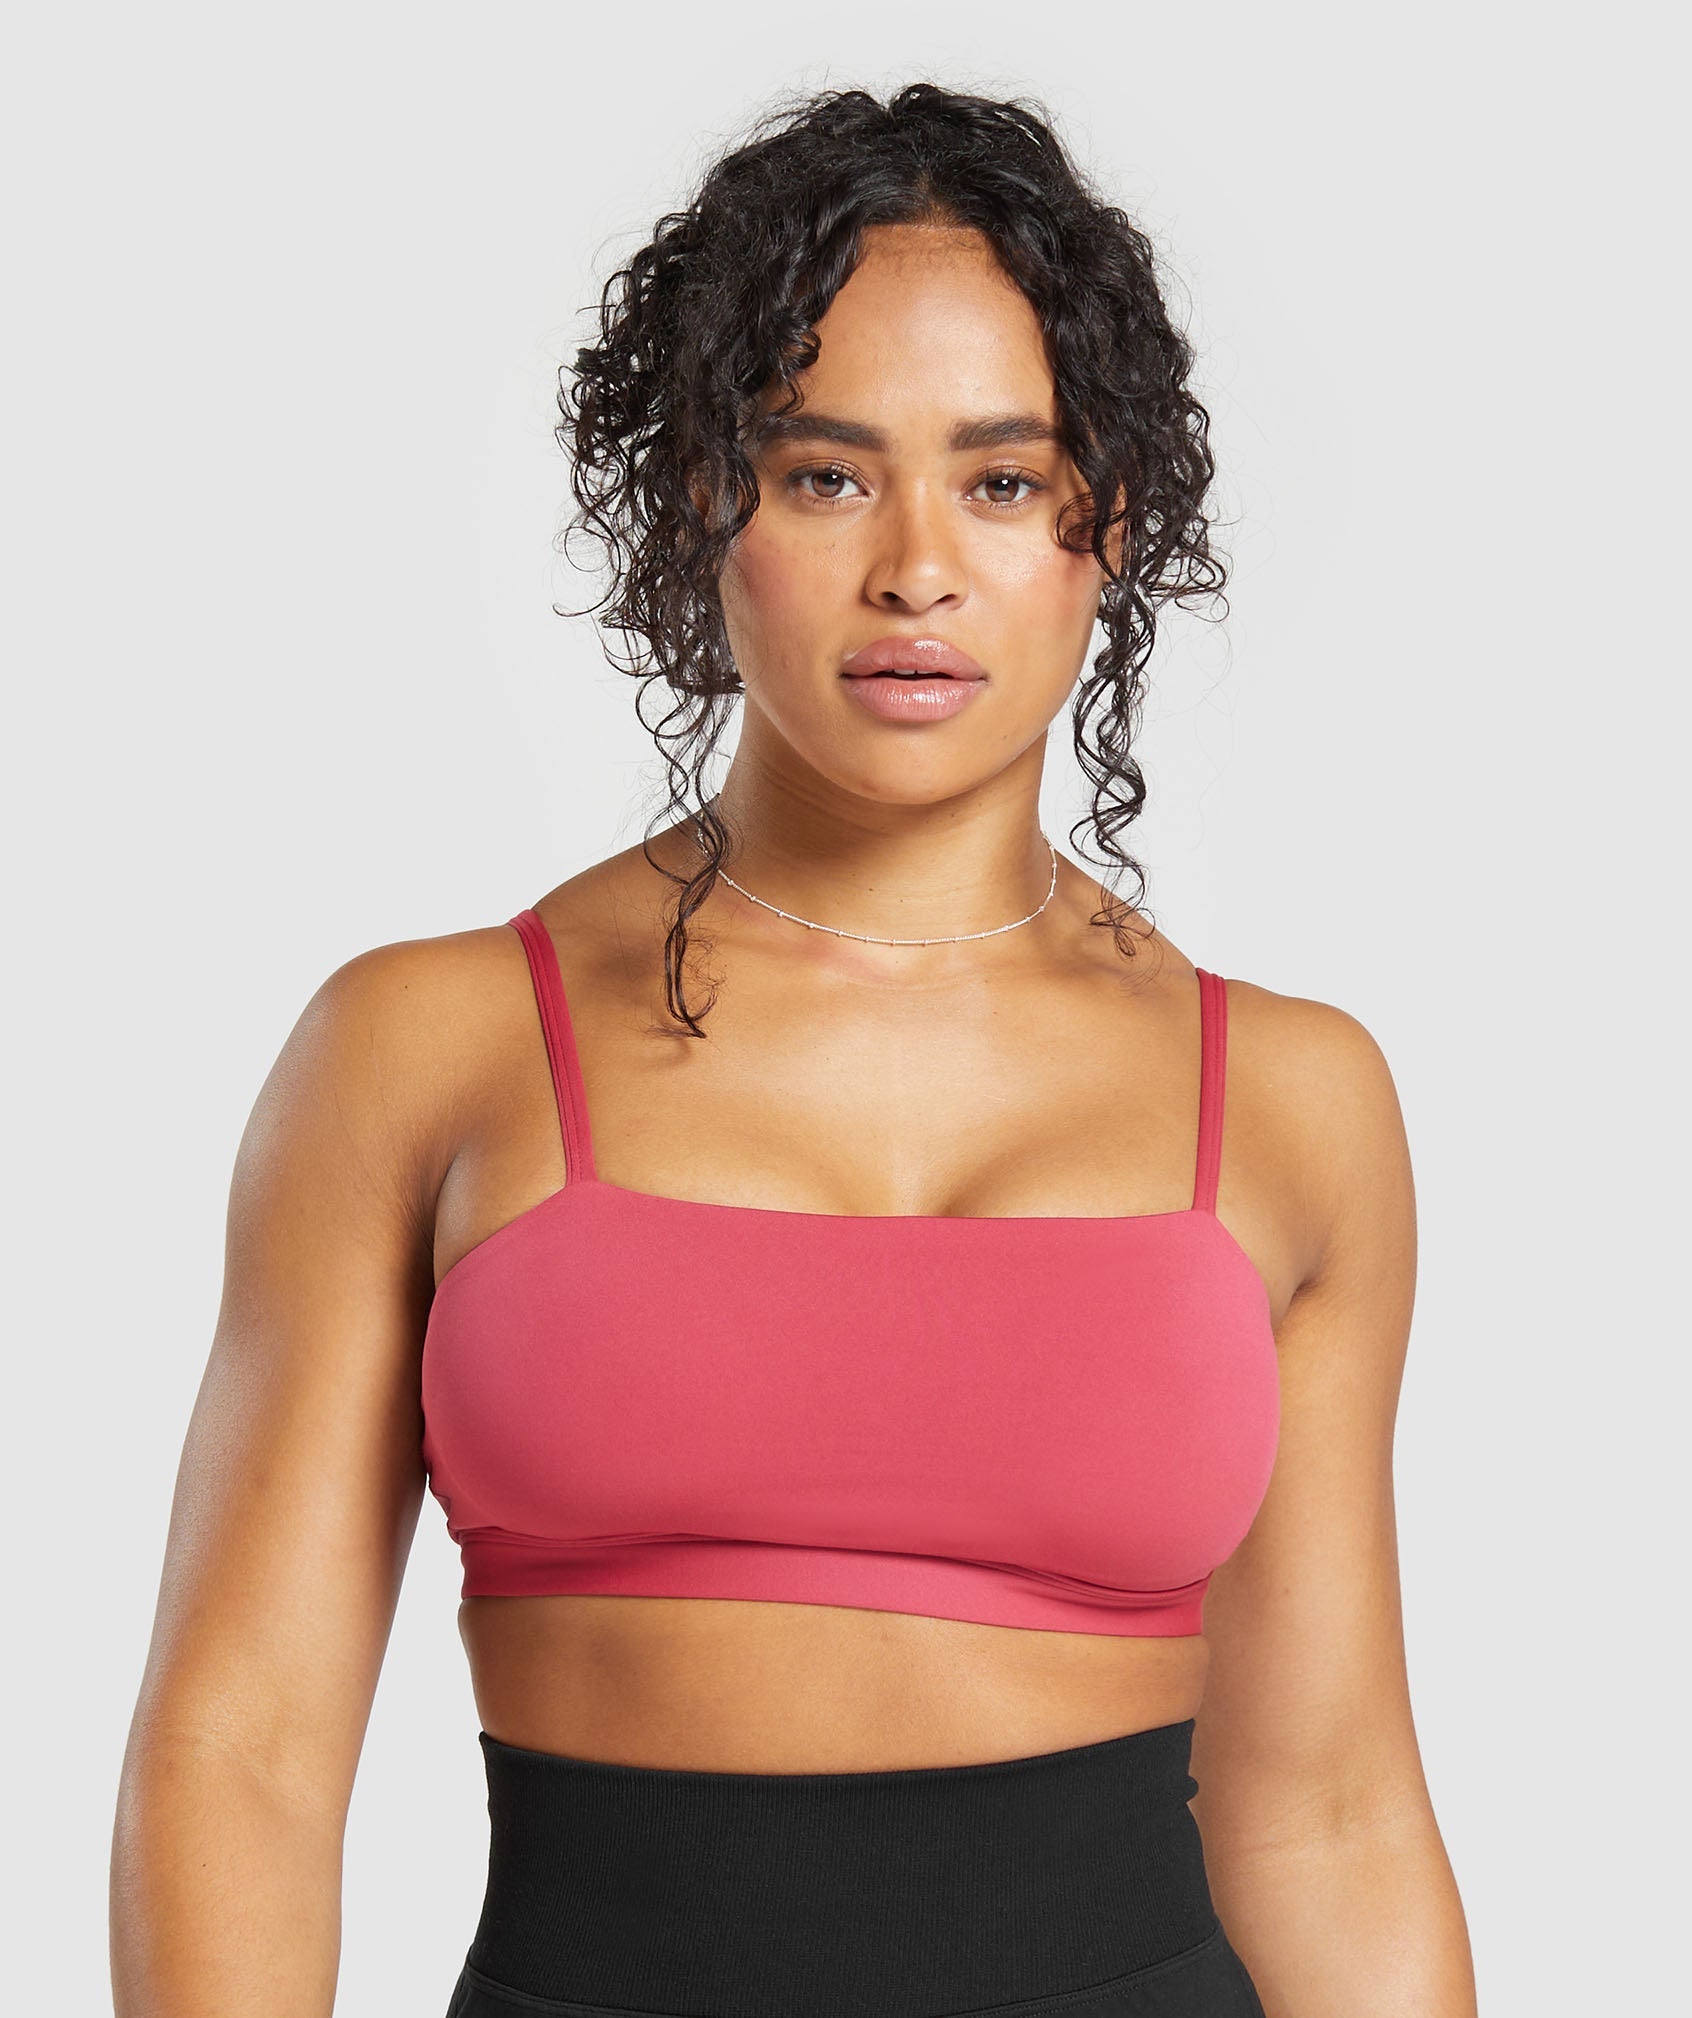 Nike - Hot-Pink Racerback Sports Top with Built-In Bra Unknown